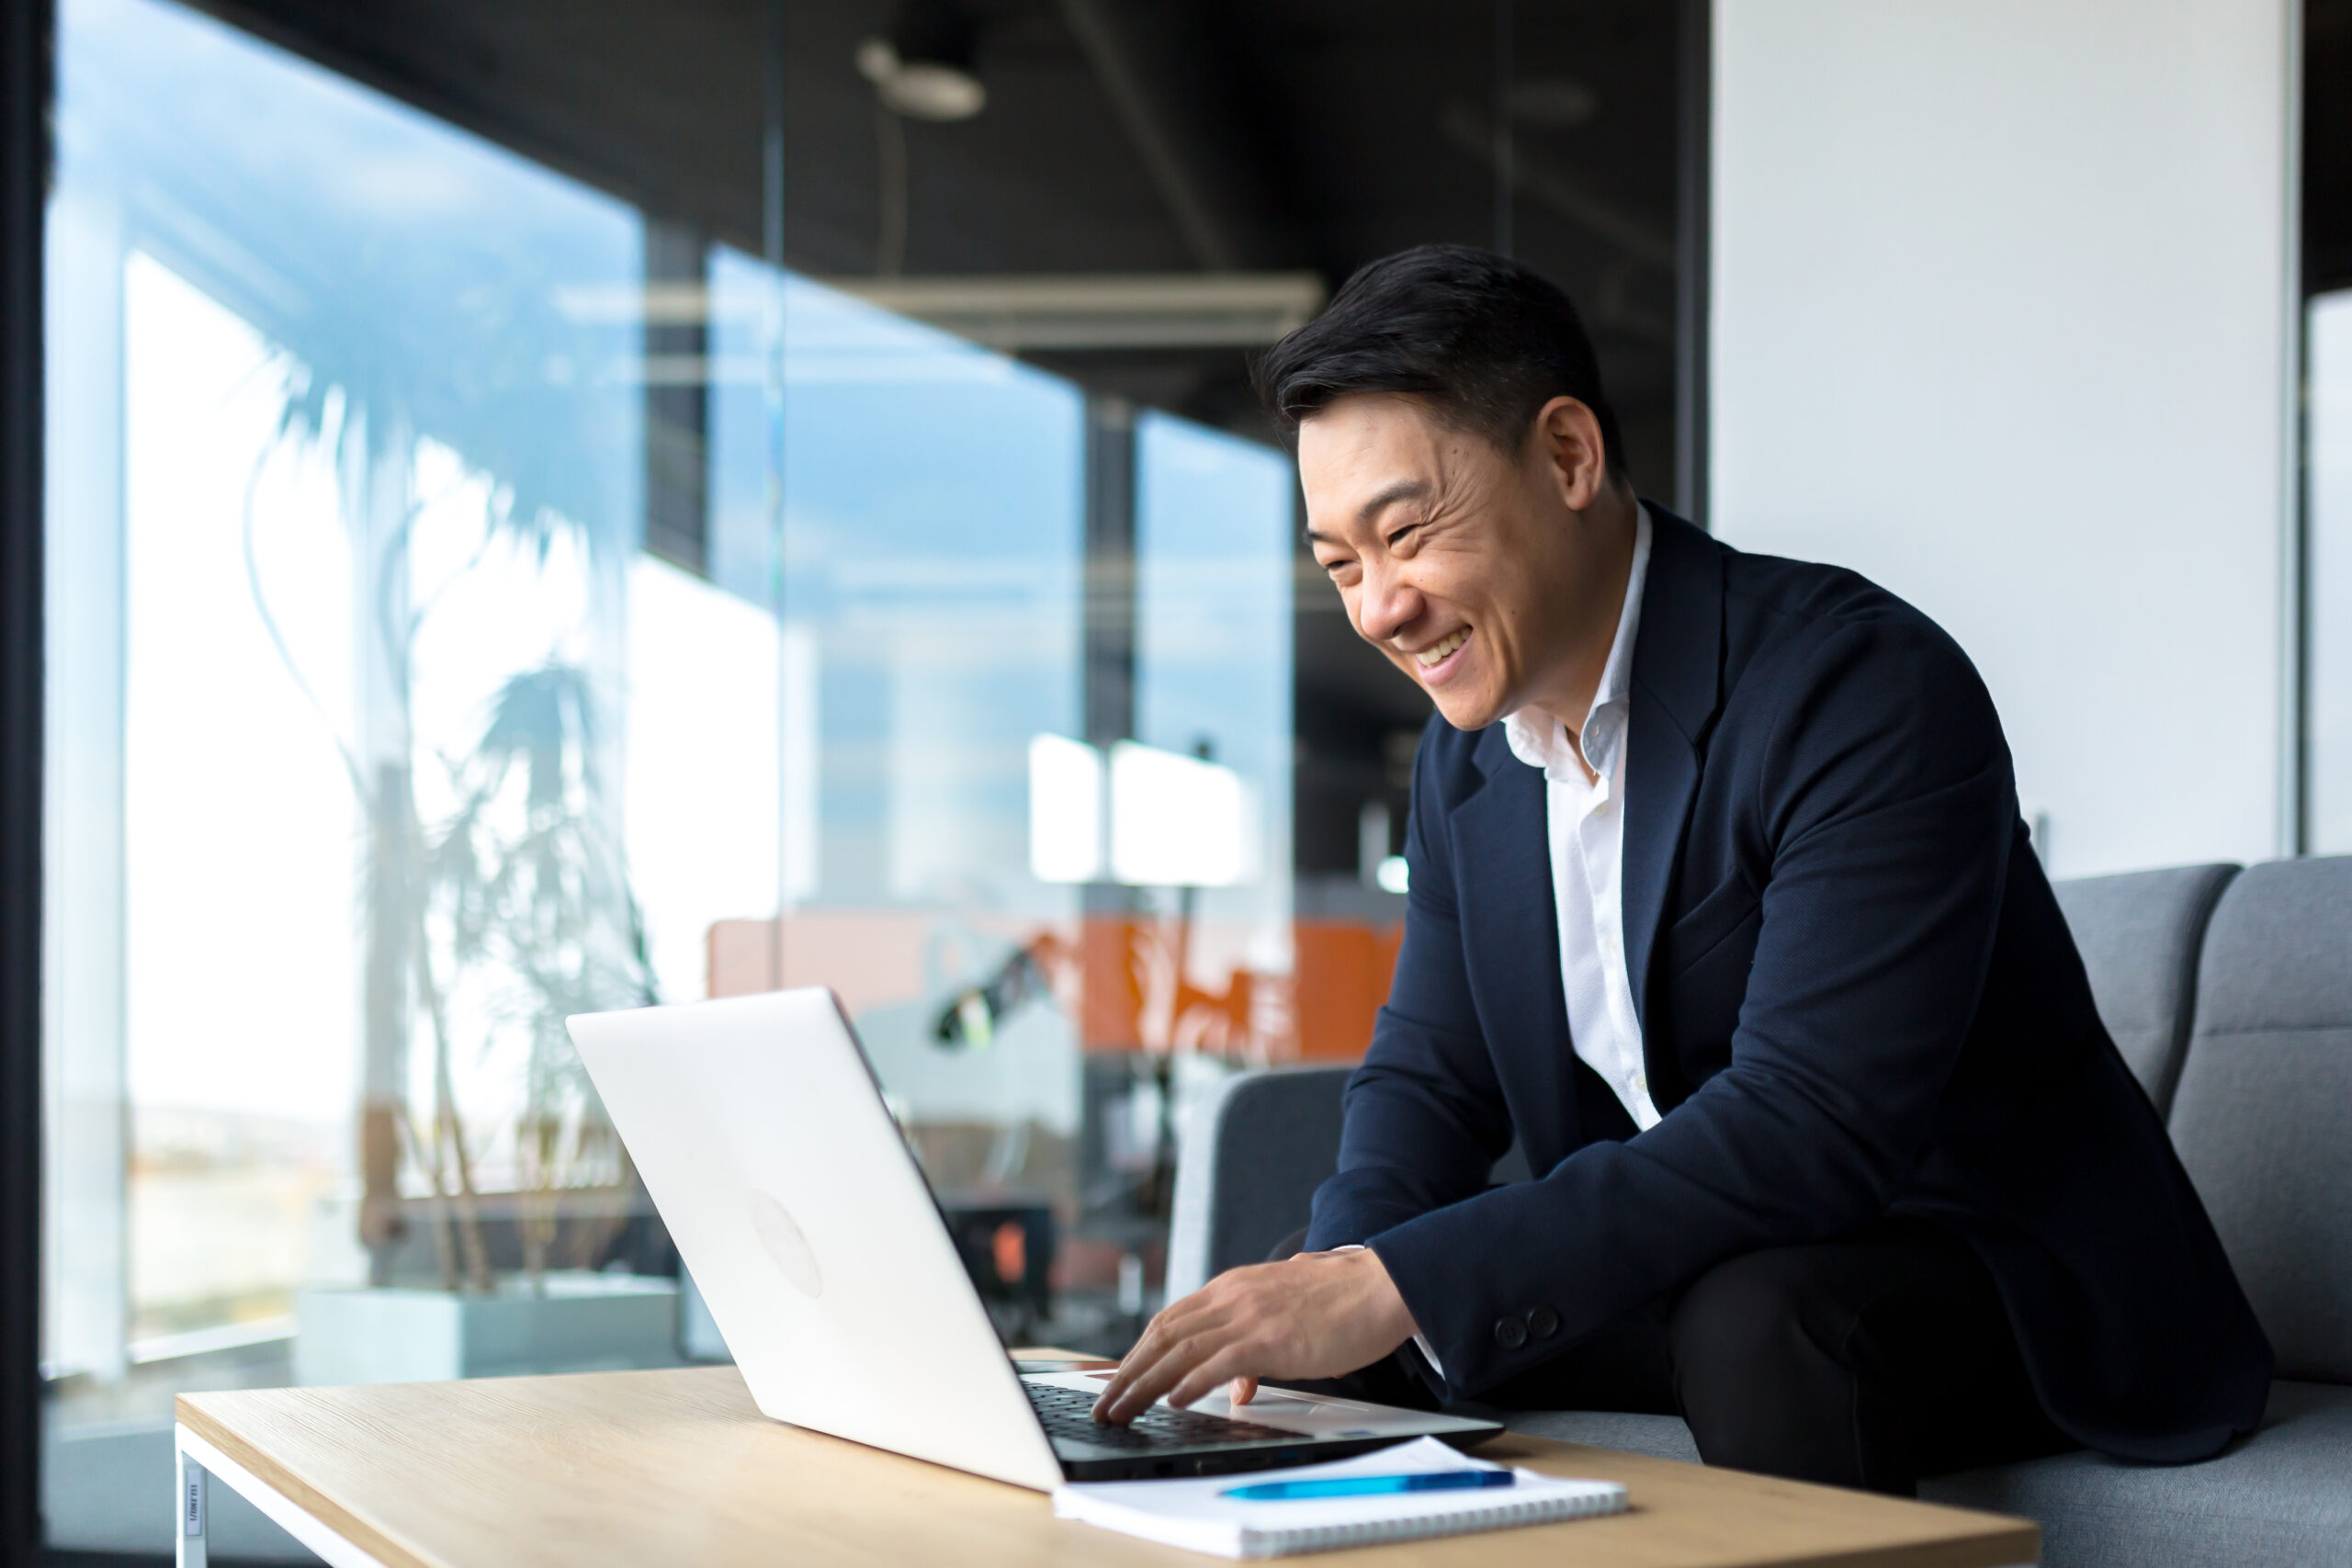 business person looking at their laptop while smiling